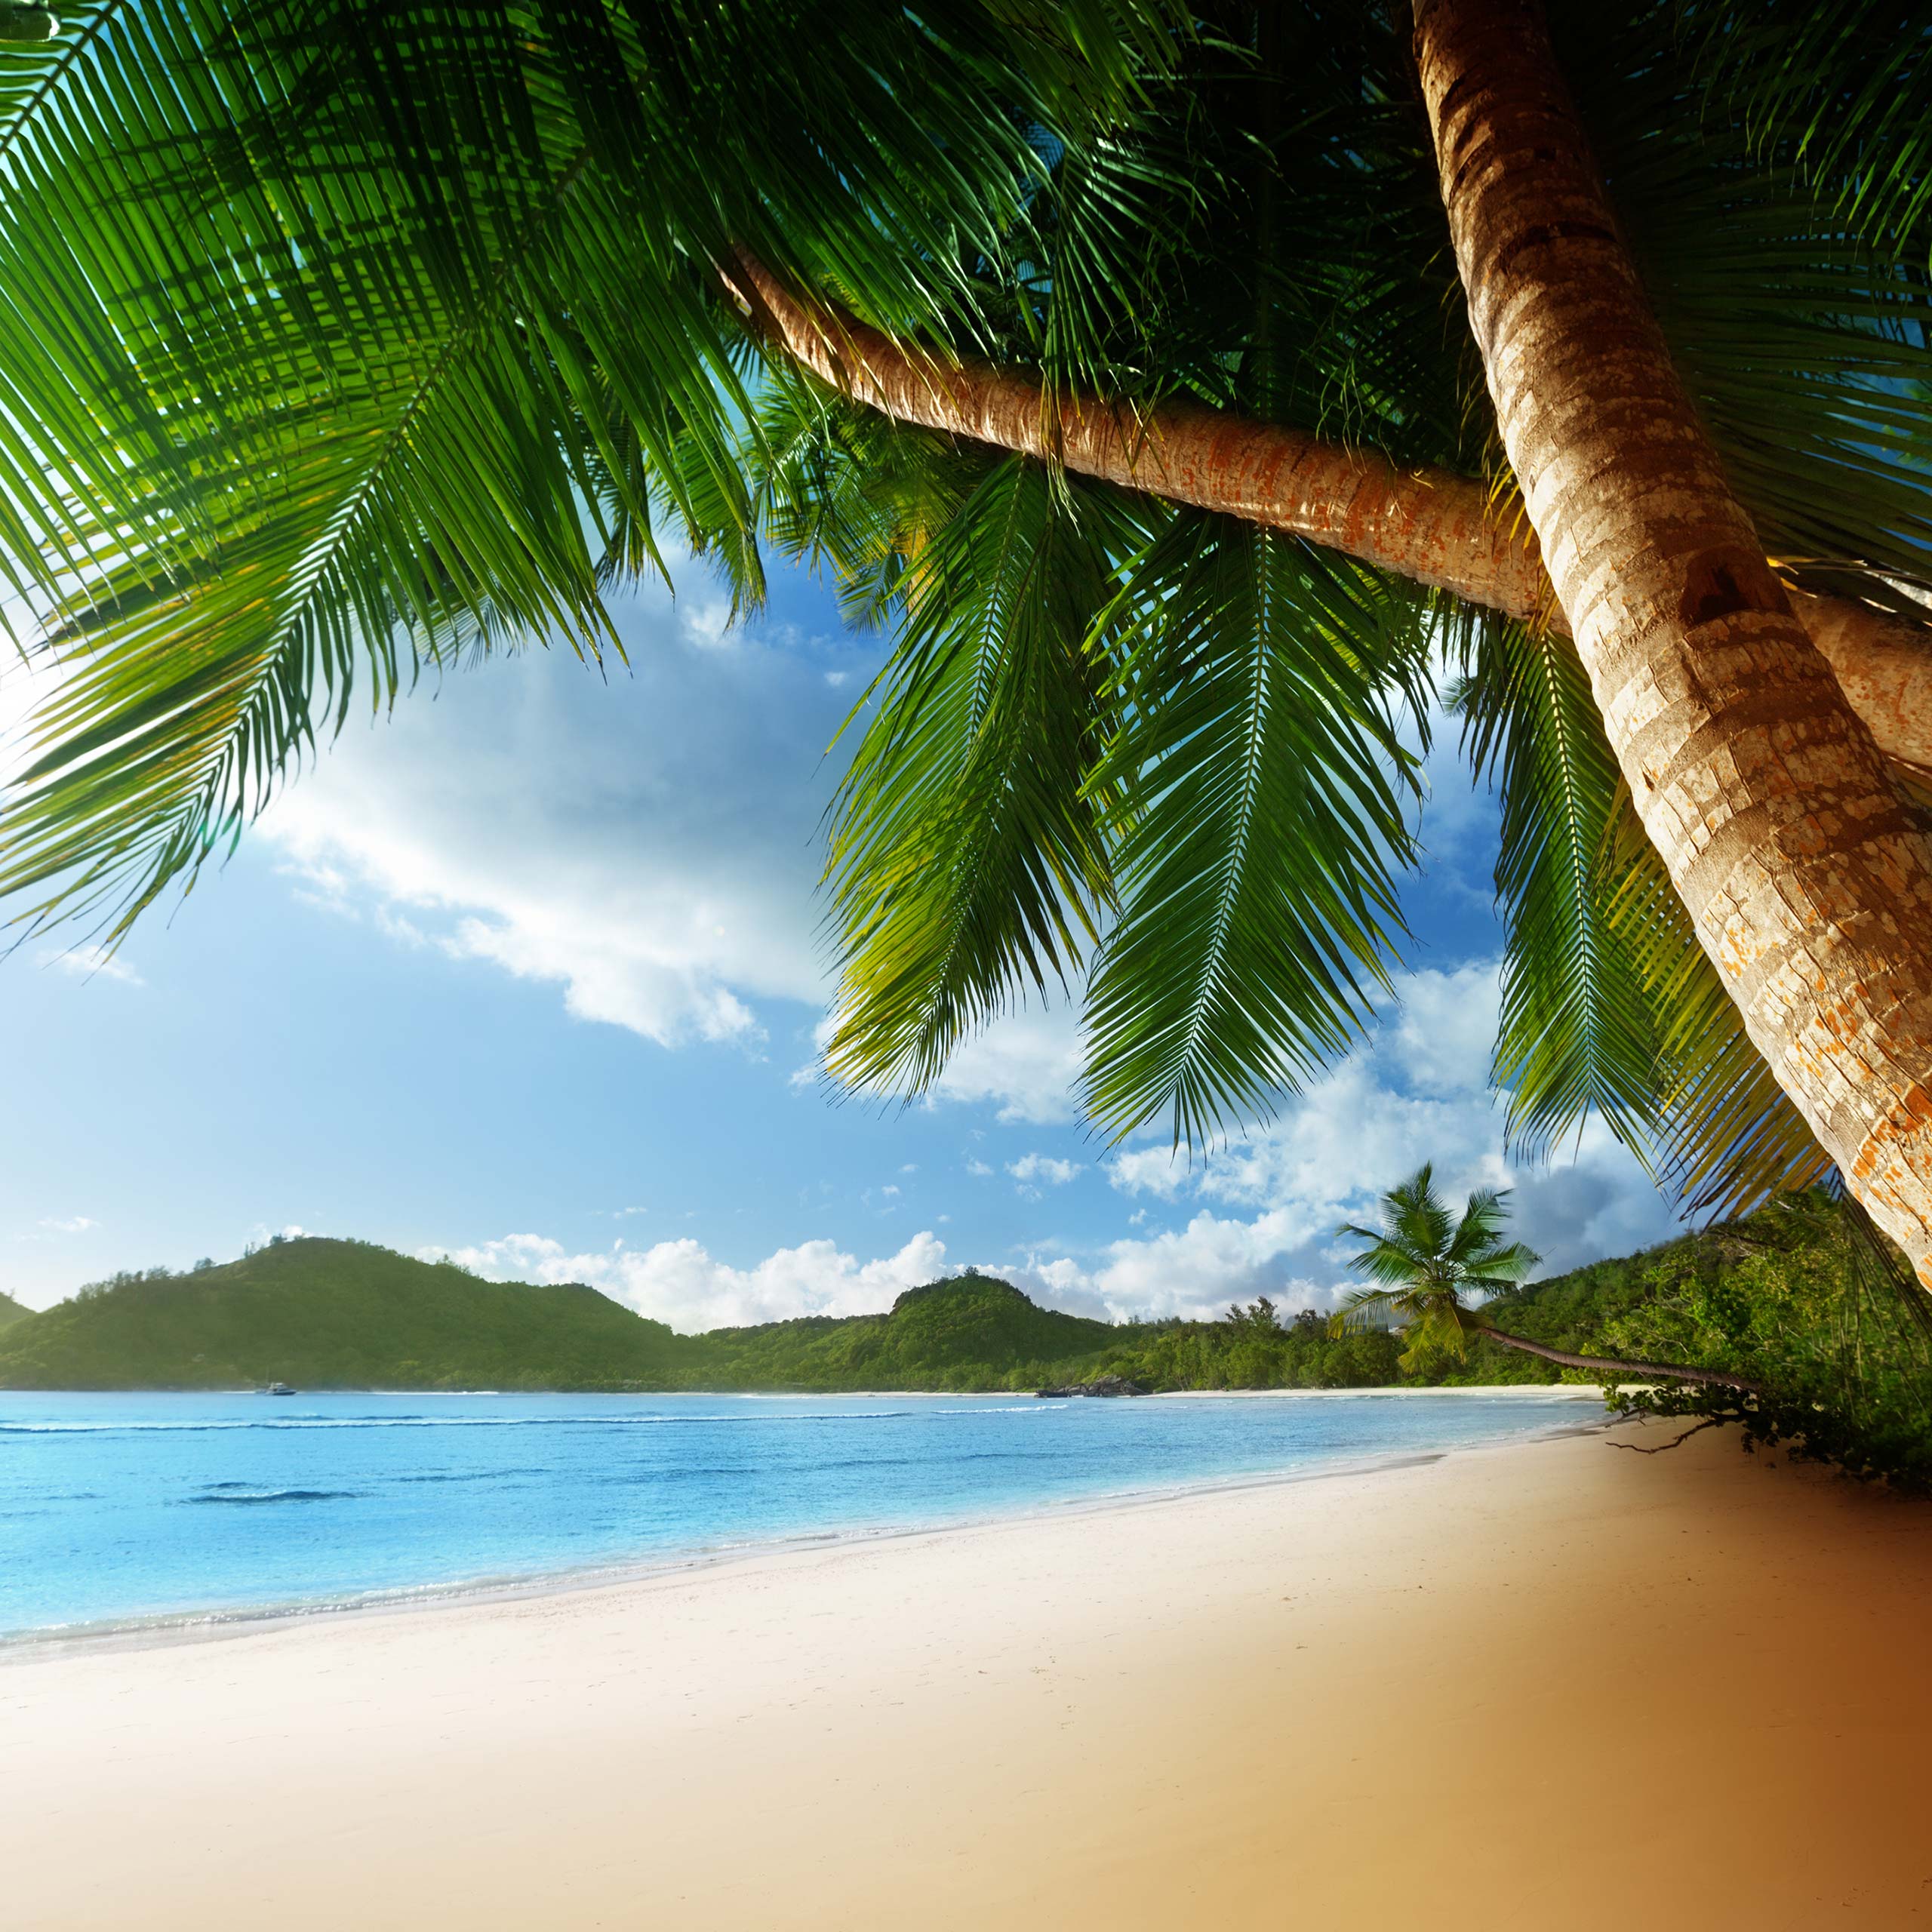 Wallpaper Coconut Tree on Beach Shore During Daytime, Background ...